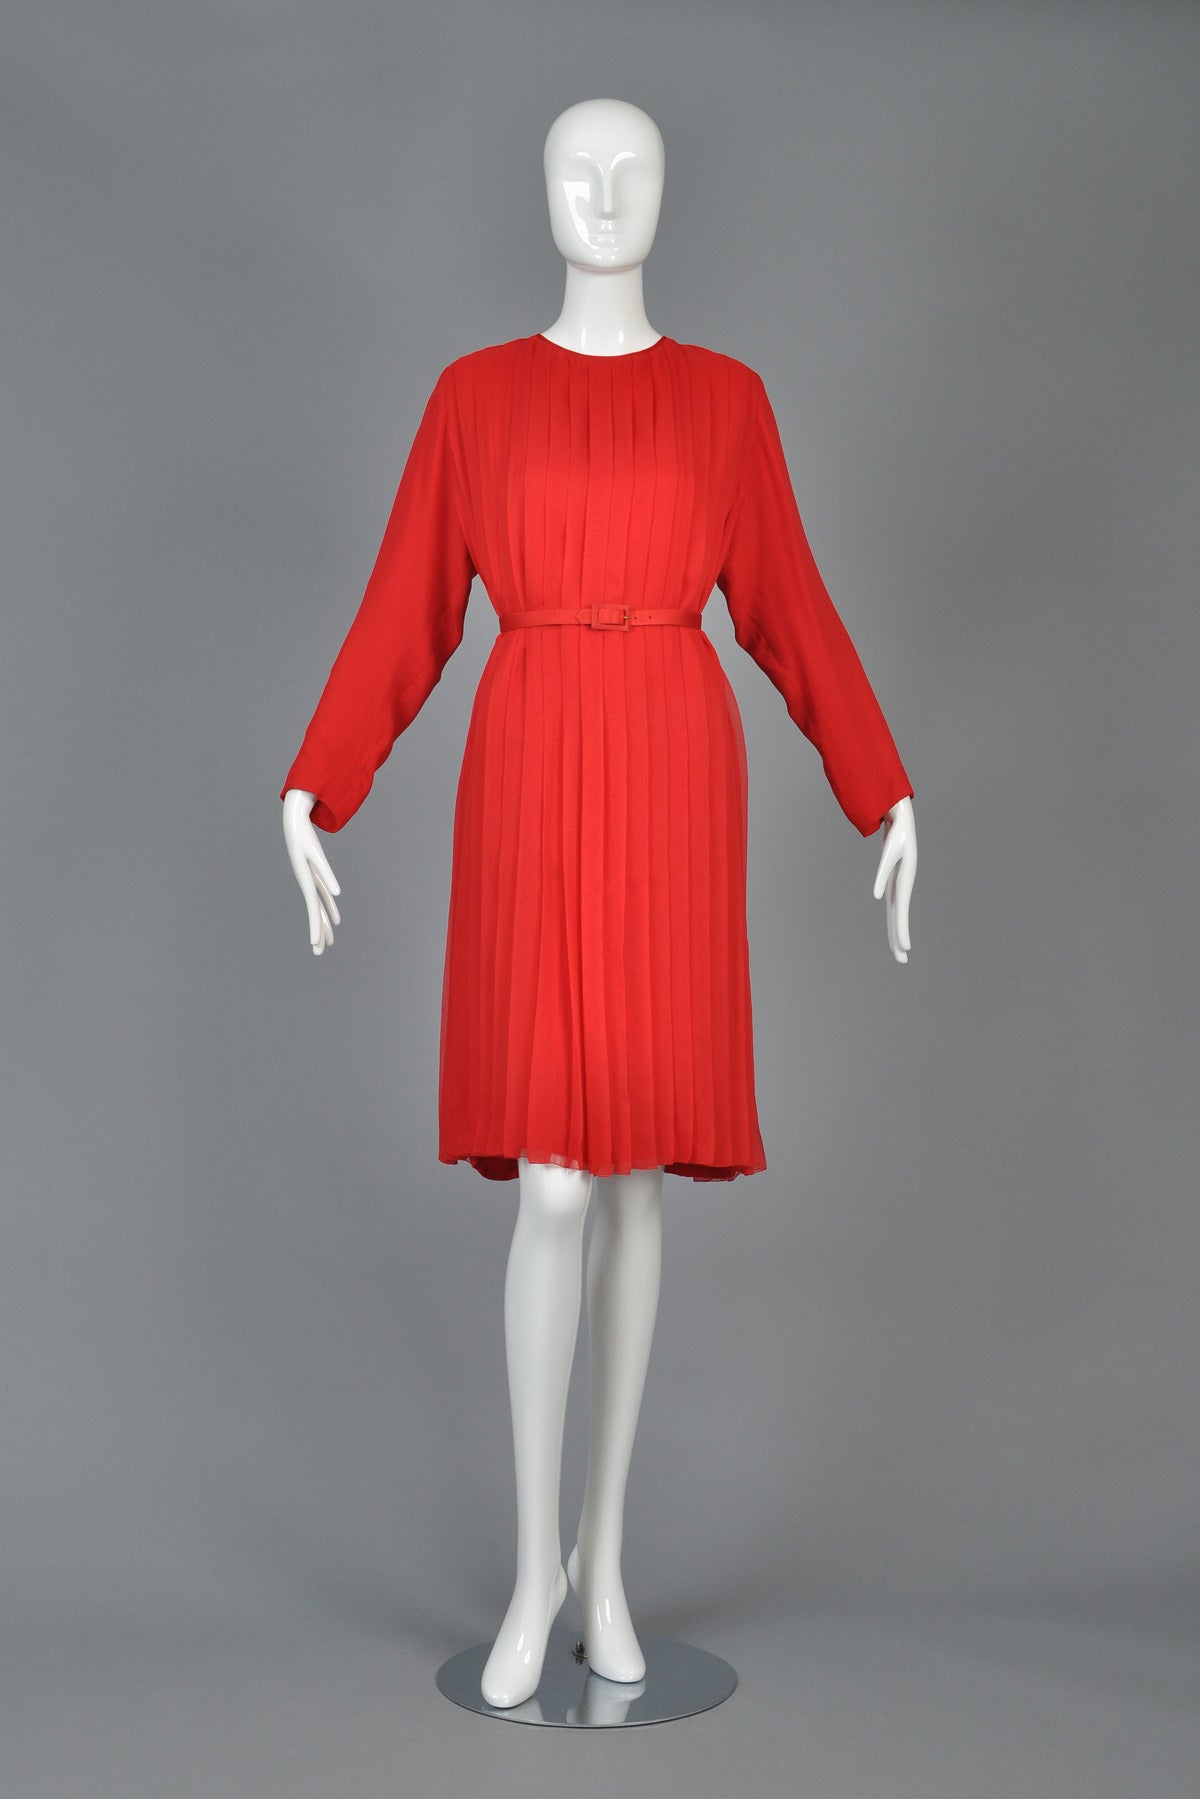 Incredible vintage 1980s silk dress by James Galanos. Ruby red silk. Fantastic full sheath shape. Fully pleated. Looks great belted (belt not included) or as is. Excellent vintage condition.

MEASUREMENTS
Bust: 41